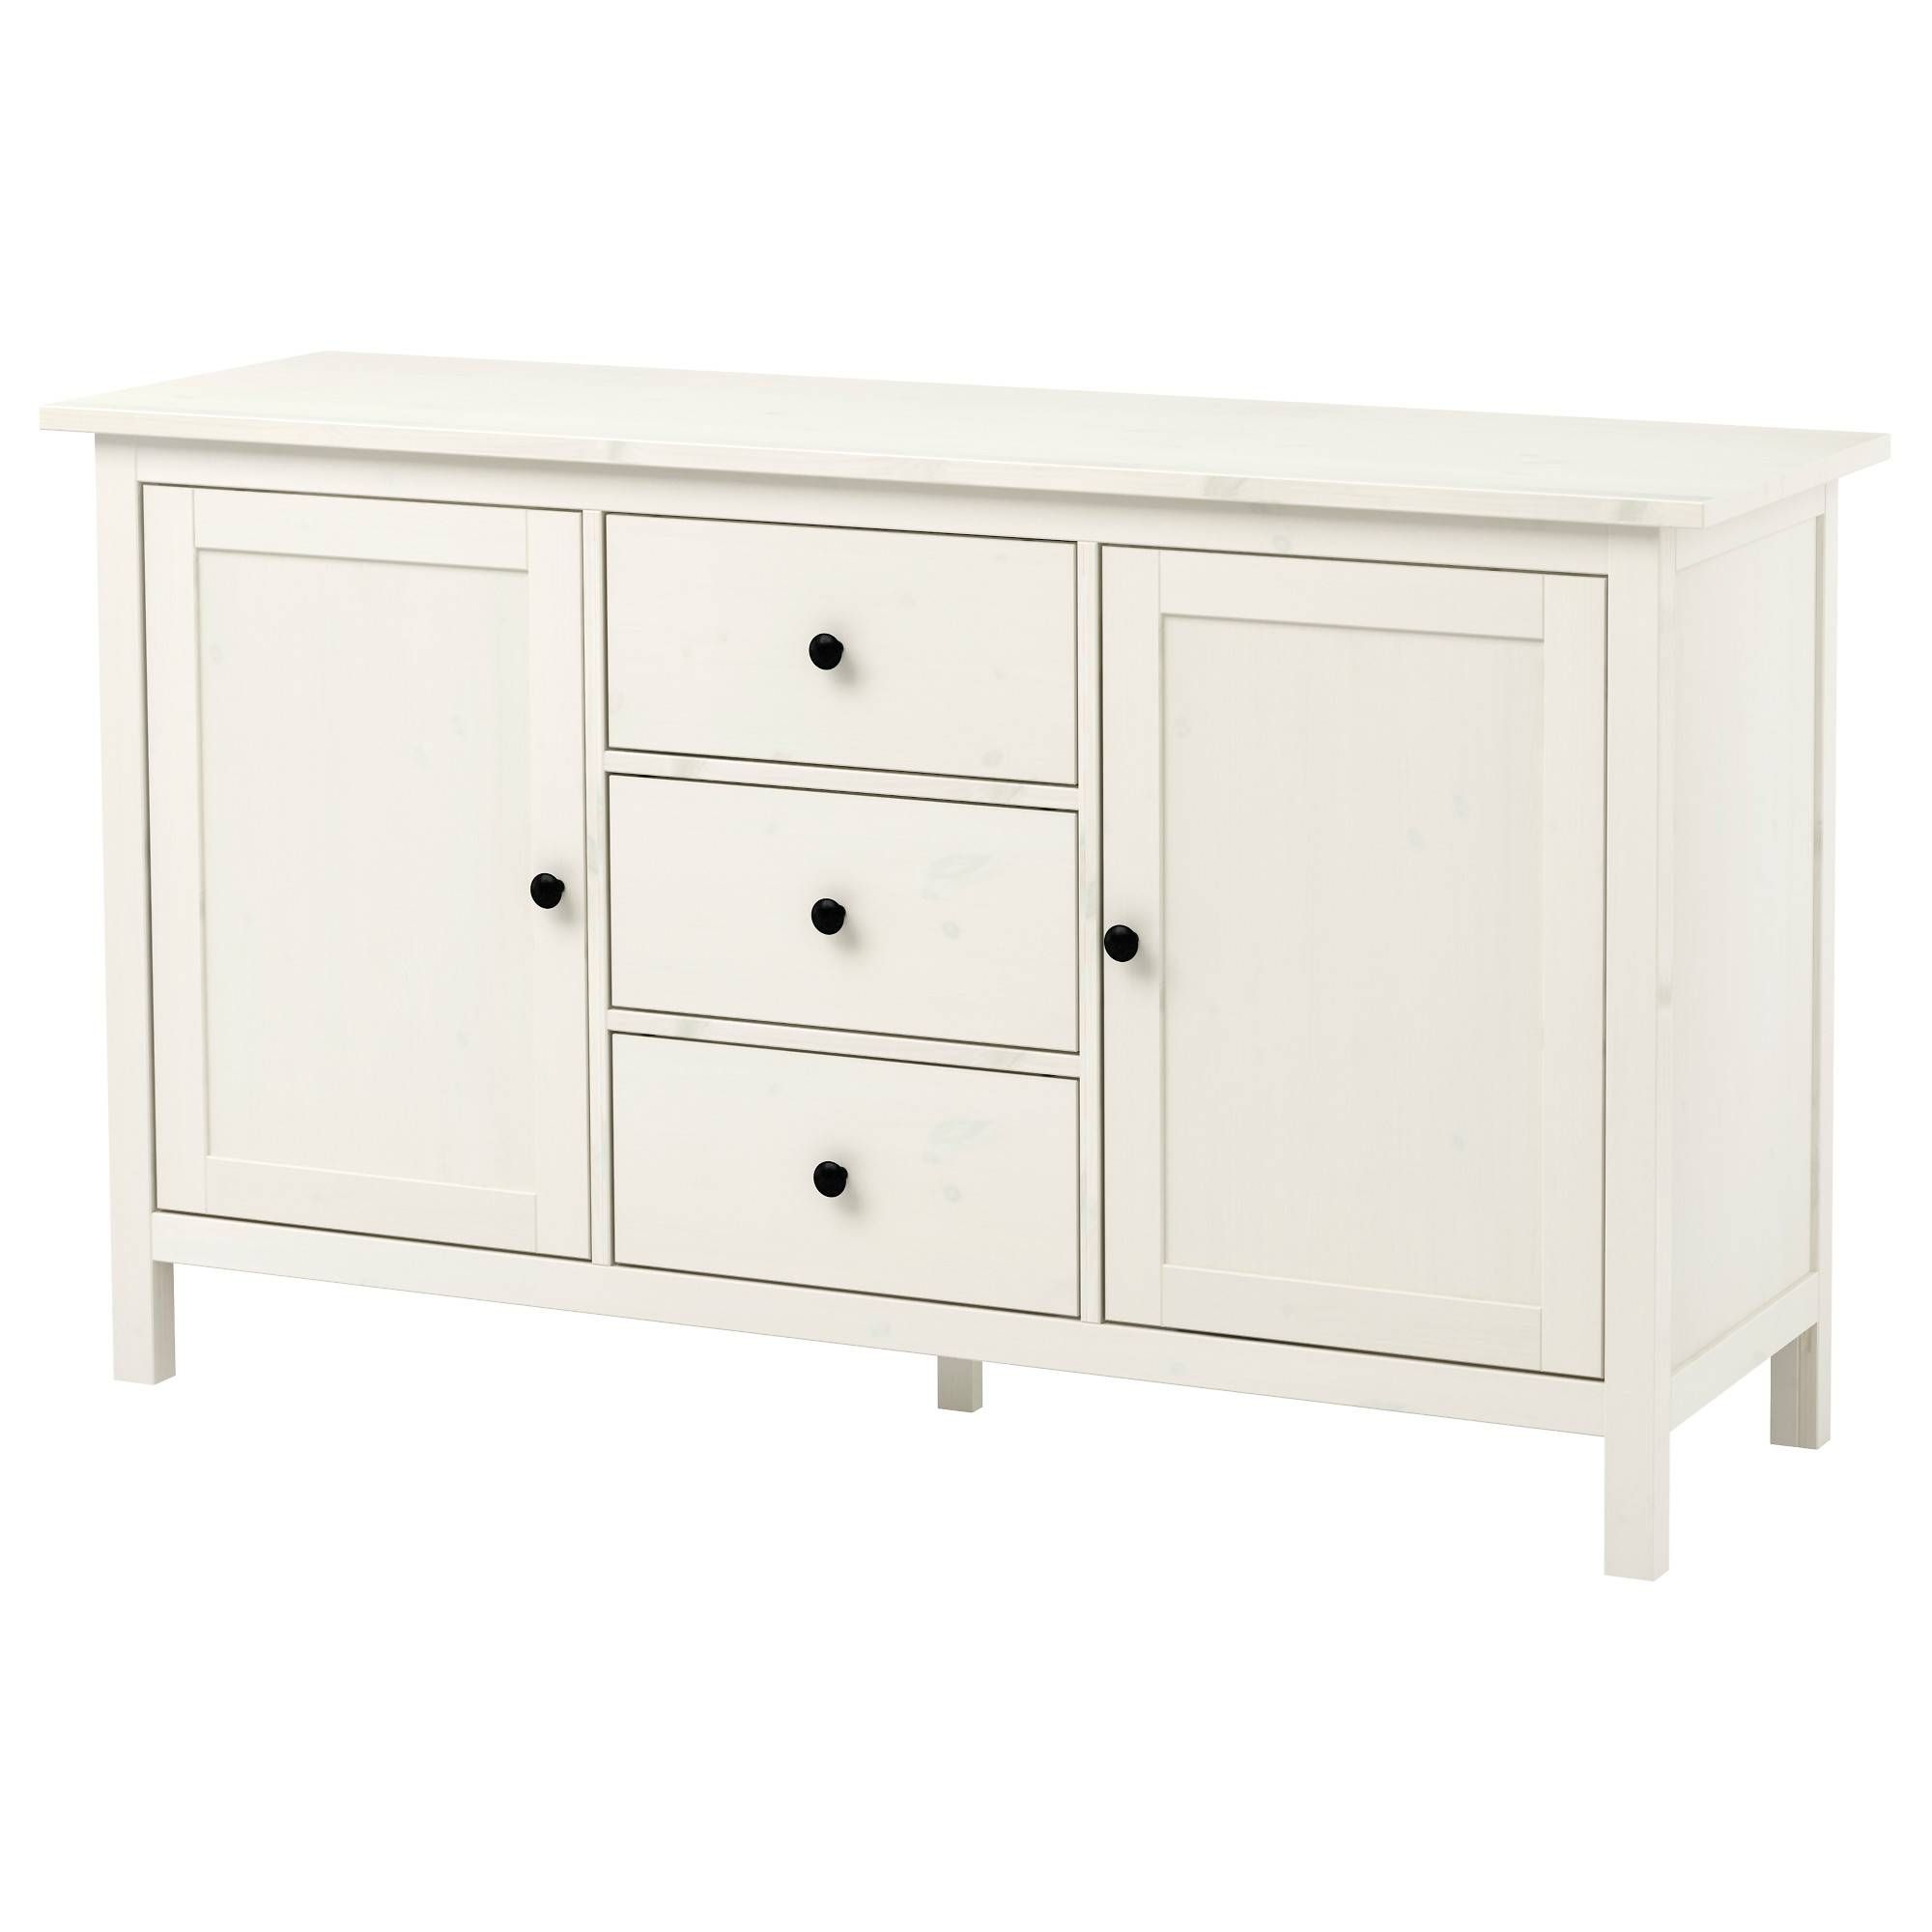 Buffet Tables & Sideboards – Ikea For White Sideboard Cabinets (View 3 of 30)